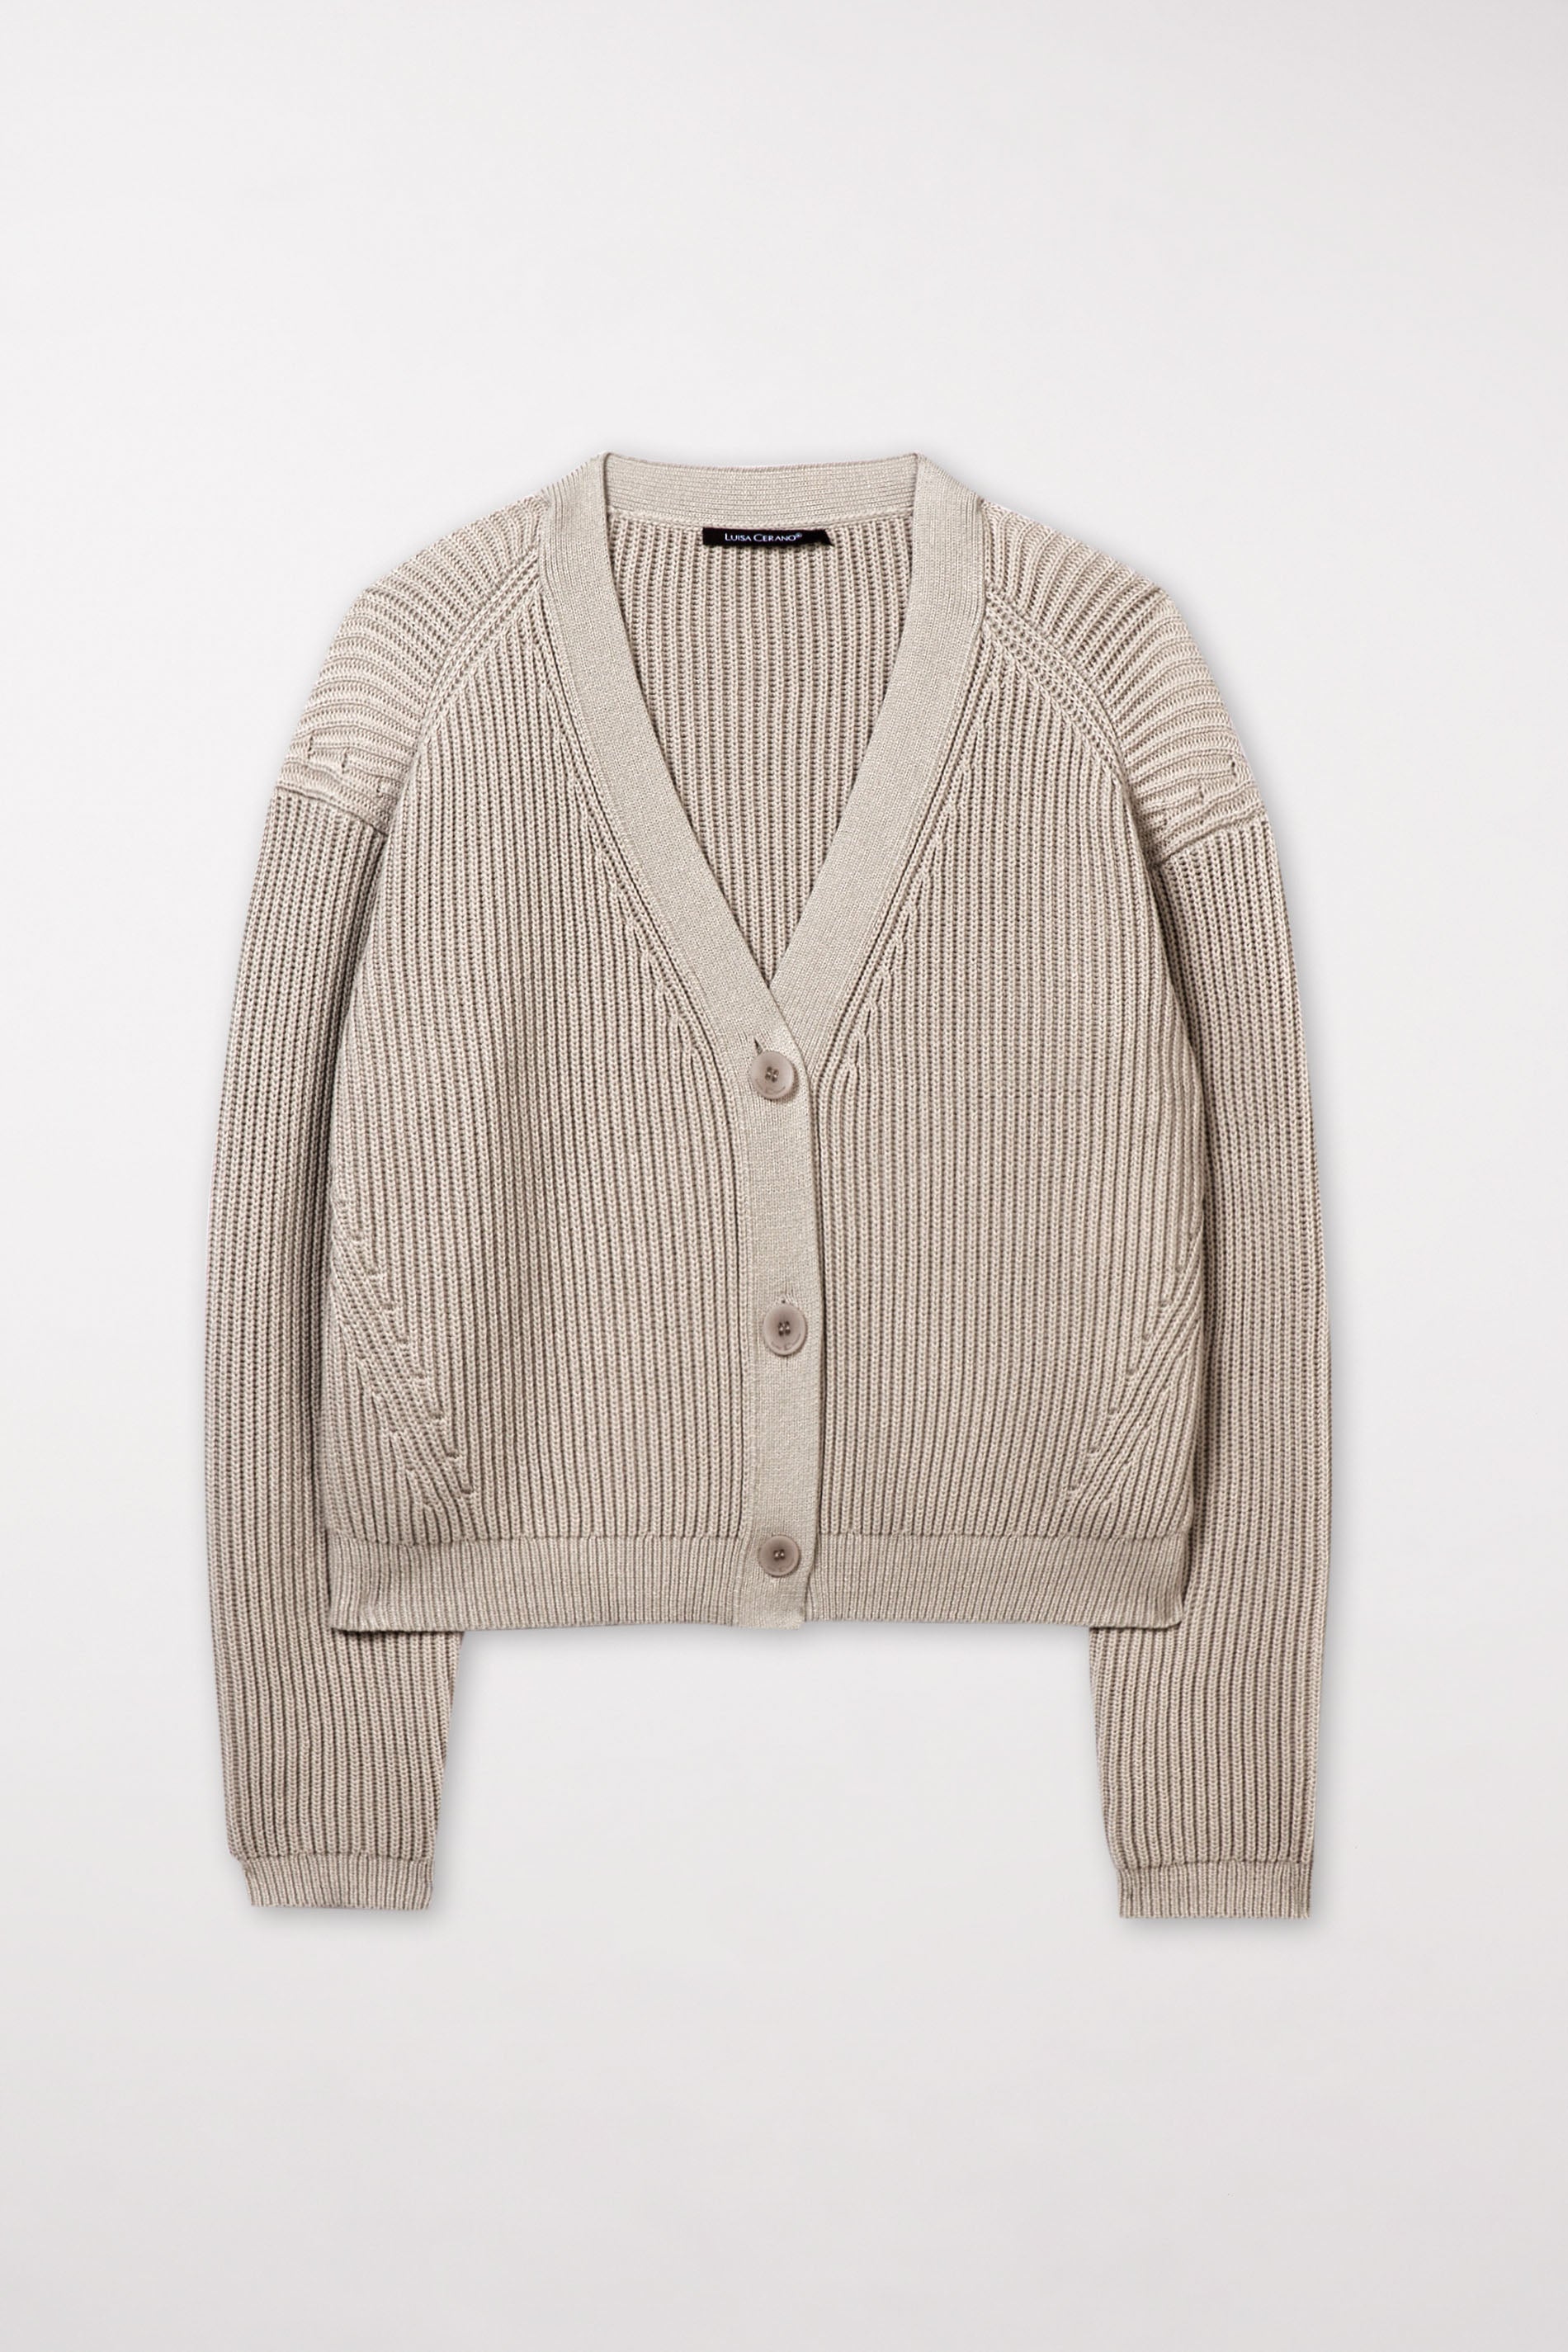 LUISA CERANO-OUTLET-SALE-Cardigan in Ripp-Optik-Strick-34-cord-by-ARCHIVIST